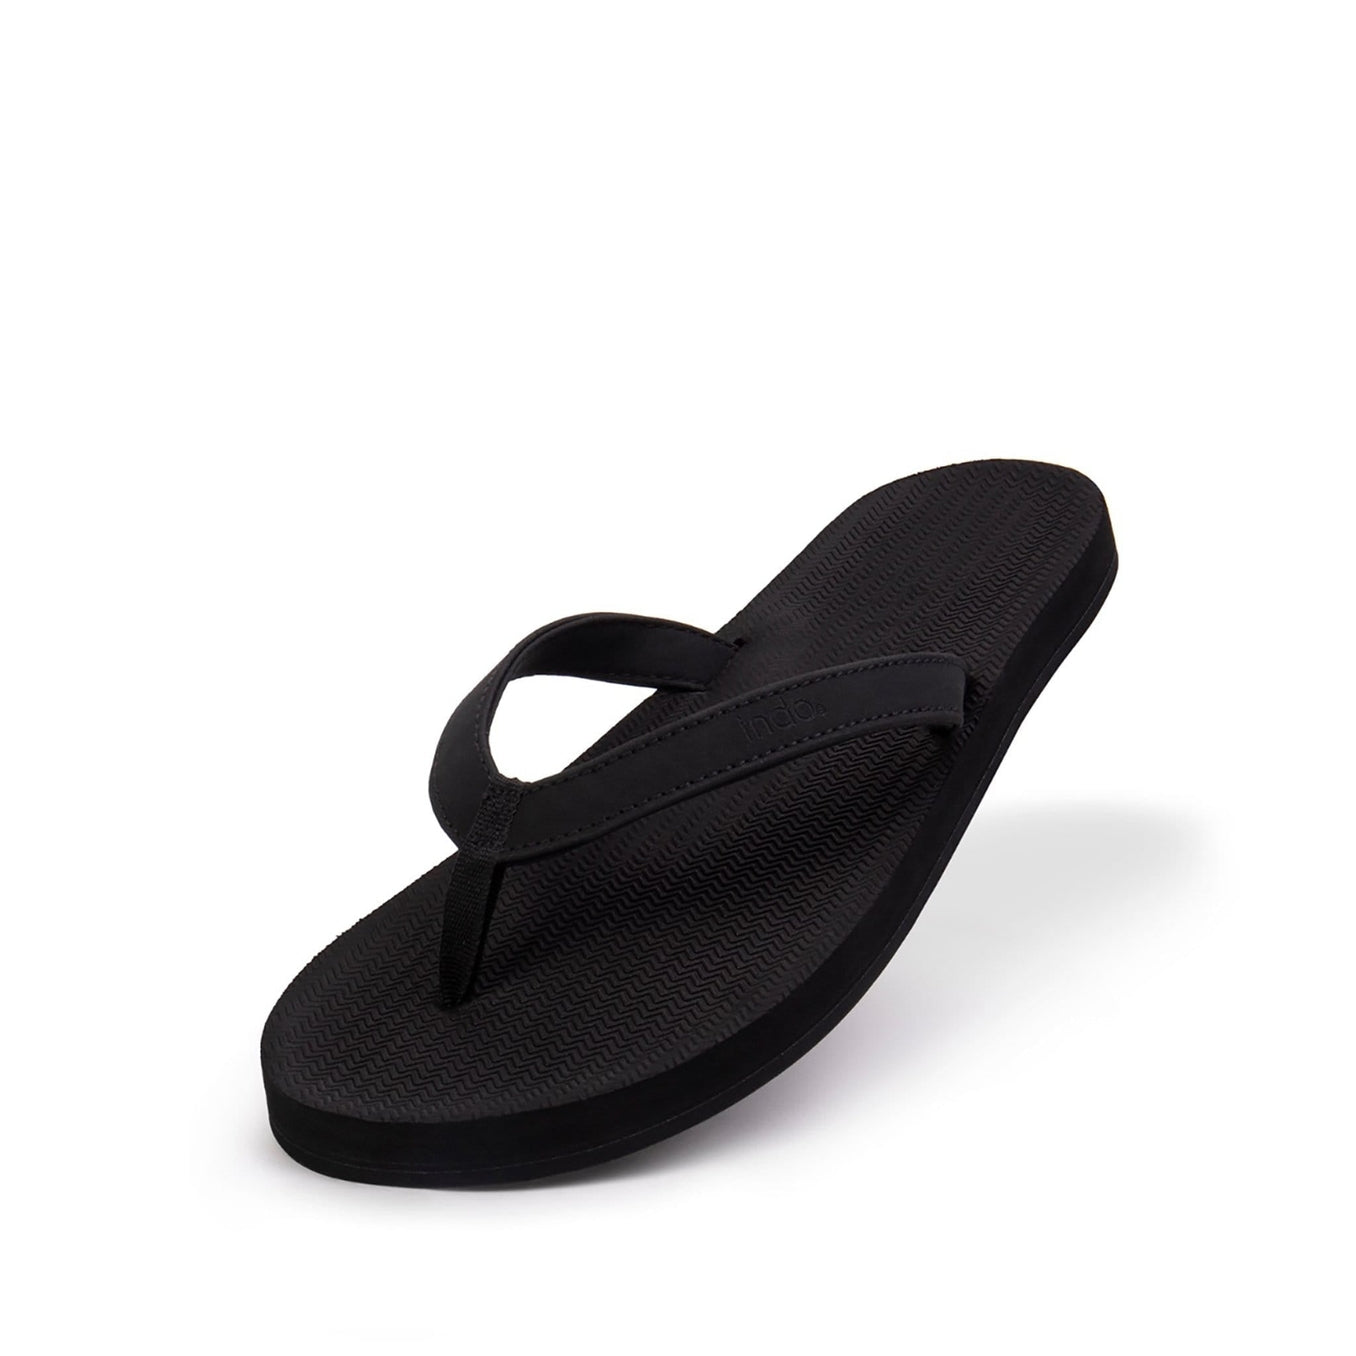 Indosole Women's Flip Flops made with recycled materials